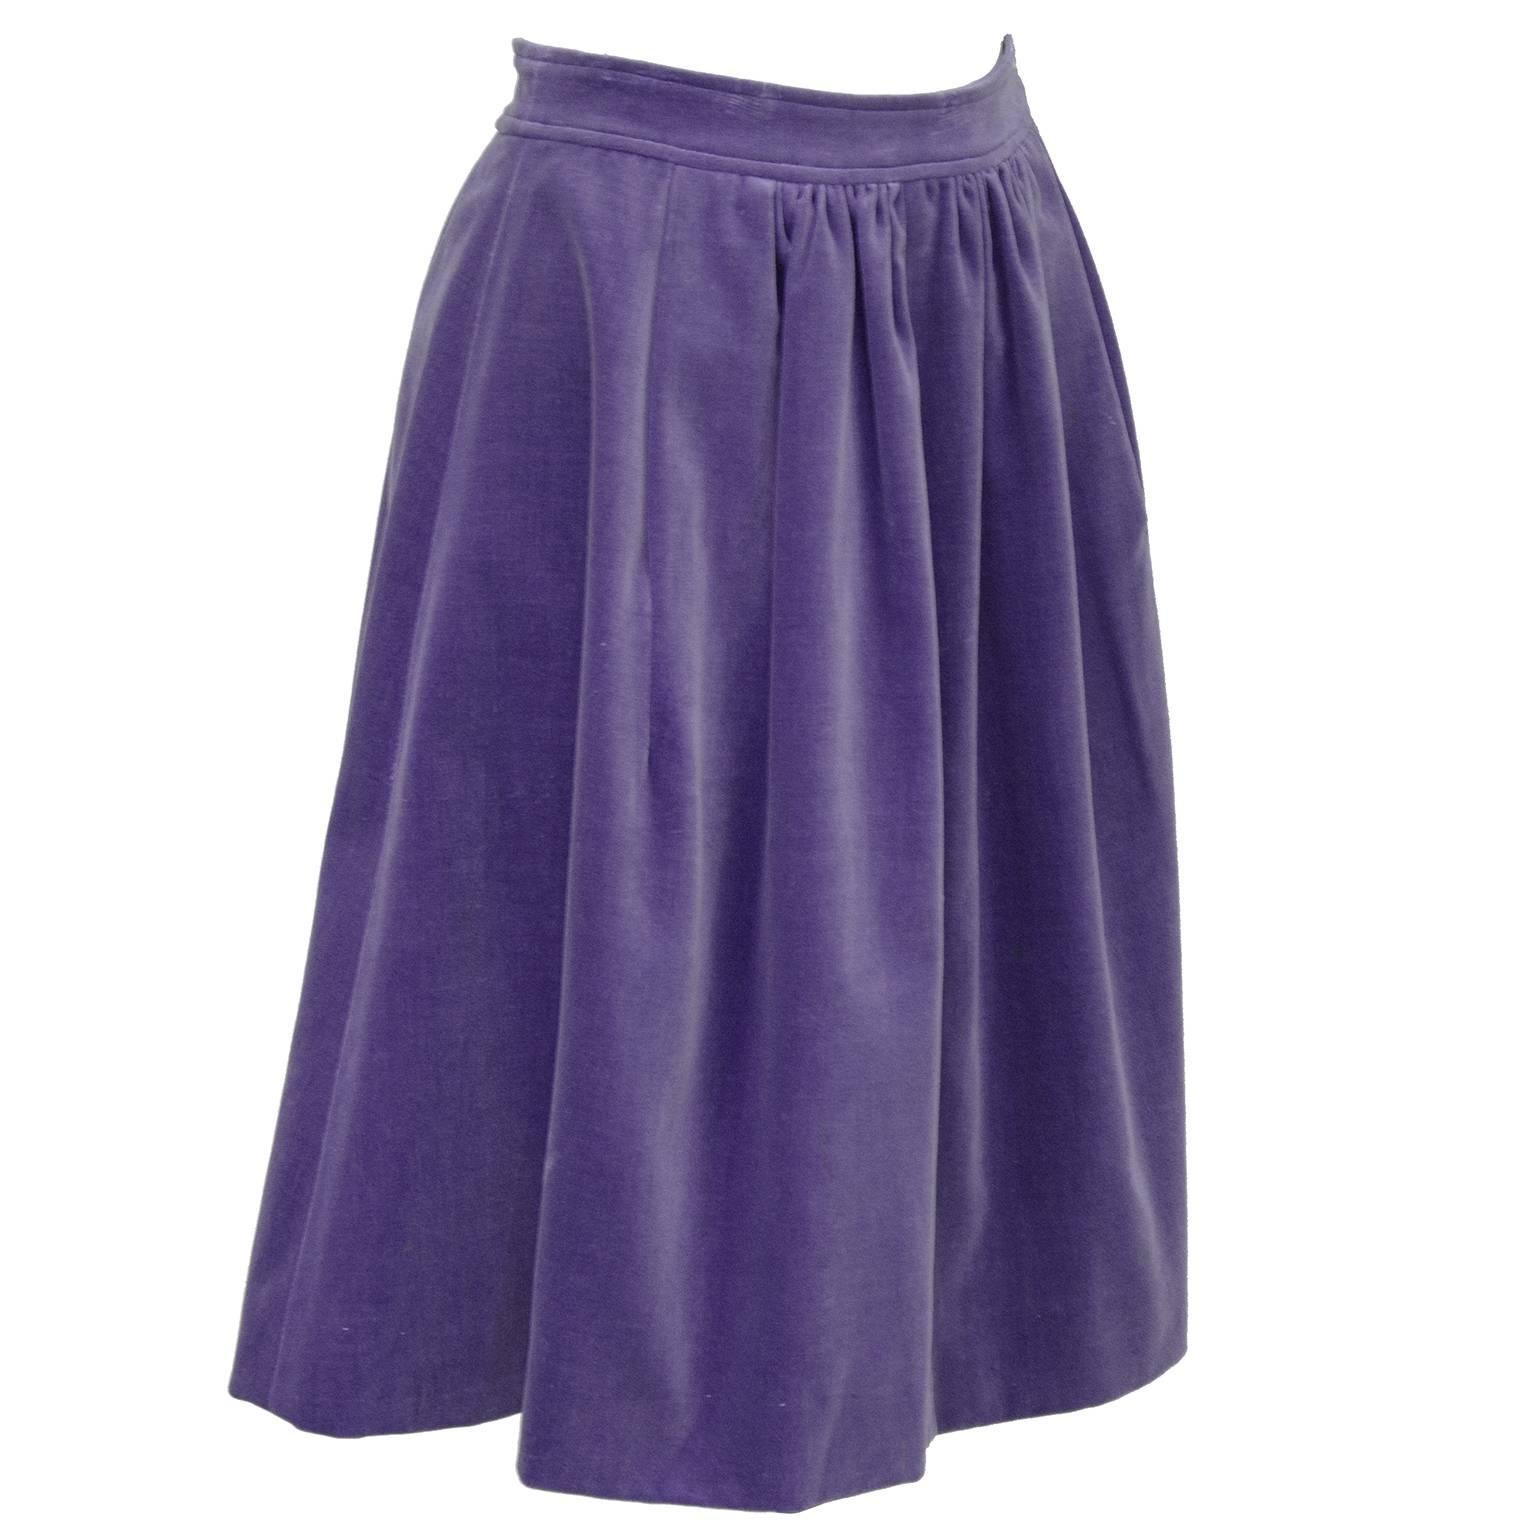 197i Fall collection lavender cotton velvet dirndl skirt by Gudule Paris. Gathering at waist and white plastic buttons down left side when wearing. Very good vintage condition. Fits like a US size 4. 

Waist 28